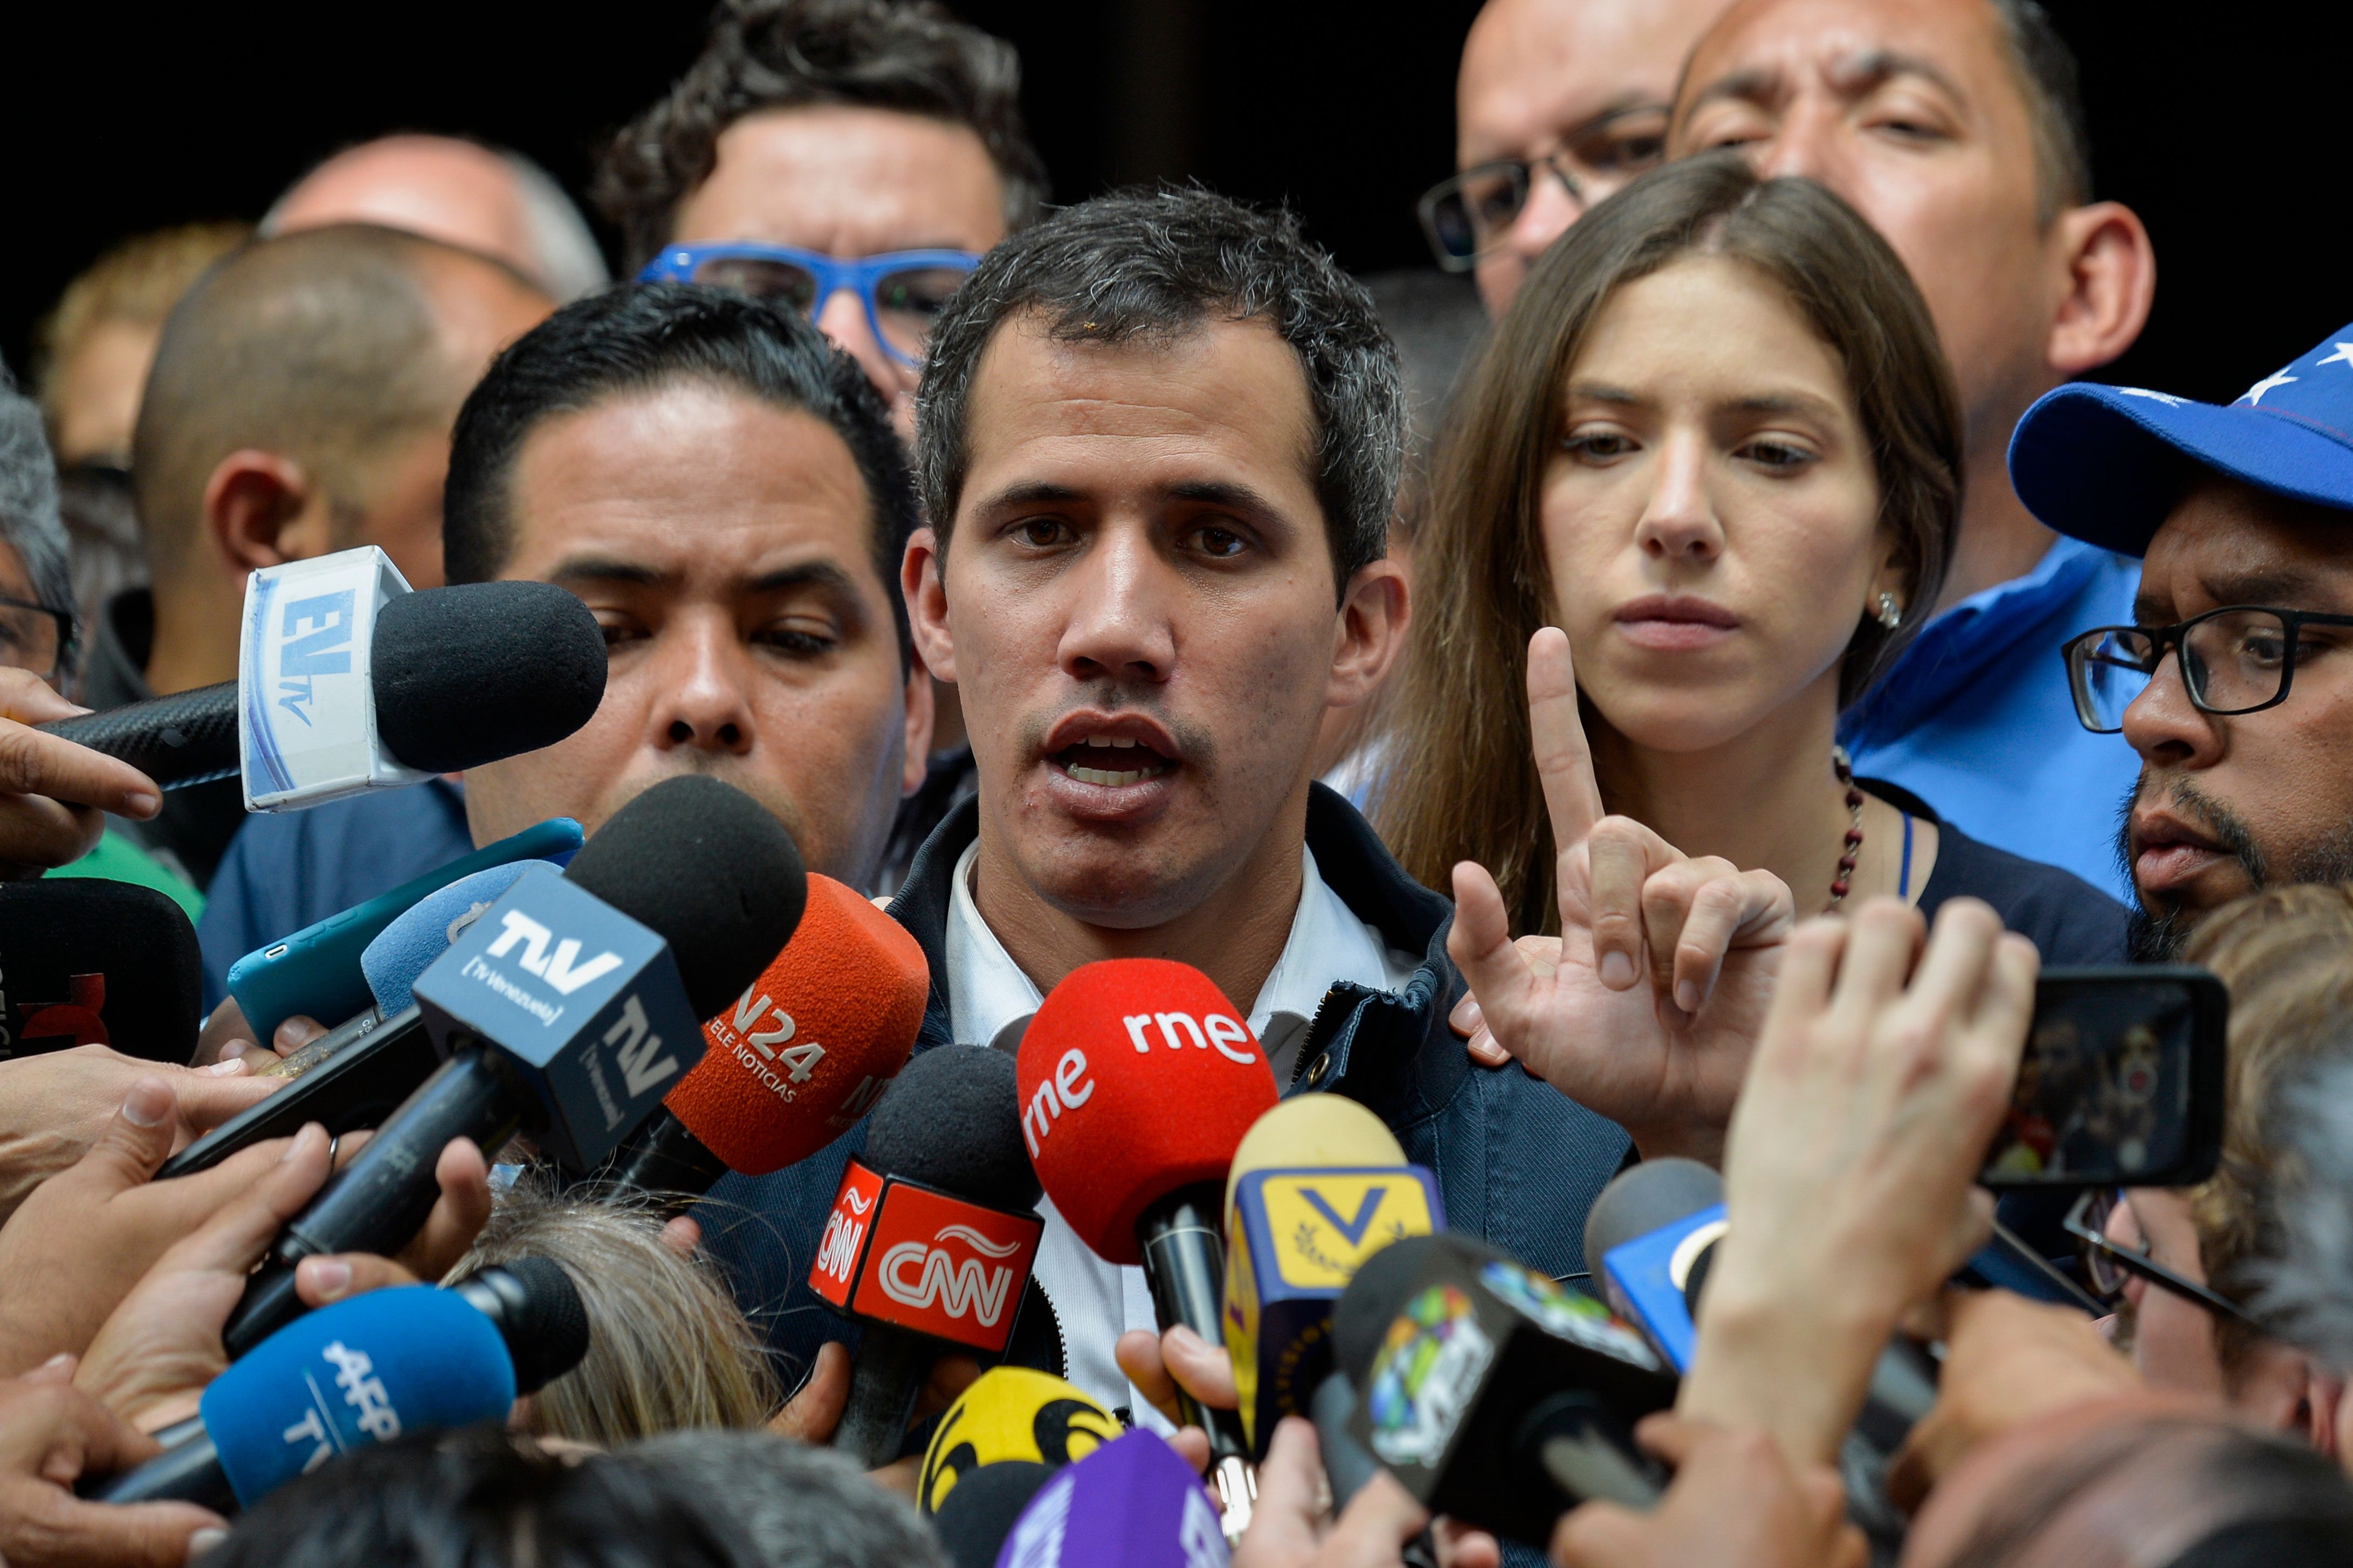 Venezuela's National Assembly head and self-proclaimed "acting president" Juan Guaido speaks to the press after attending a mass in honour to the fallen in the fight for freedom, political prisoners and the exiled, at the San Jose church in Caracas on January 27, 2019. - Guaido, who has galvanized a previously divided opposition, is offering an amnesty approved by the opposition-controlled National Assembly to anyone in the military who disavows President Nicolas Maduro, even suggesting amnesty for Maduro himself. (Photo by LUIS ROBAYO/AFP/Getty Images)